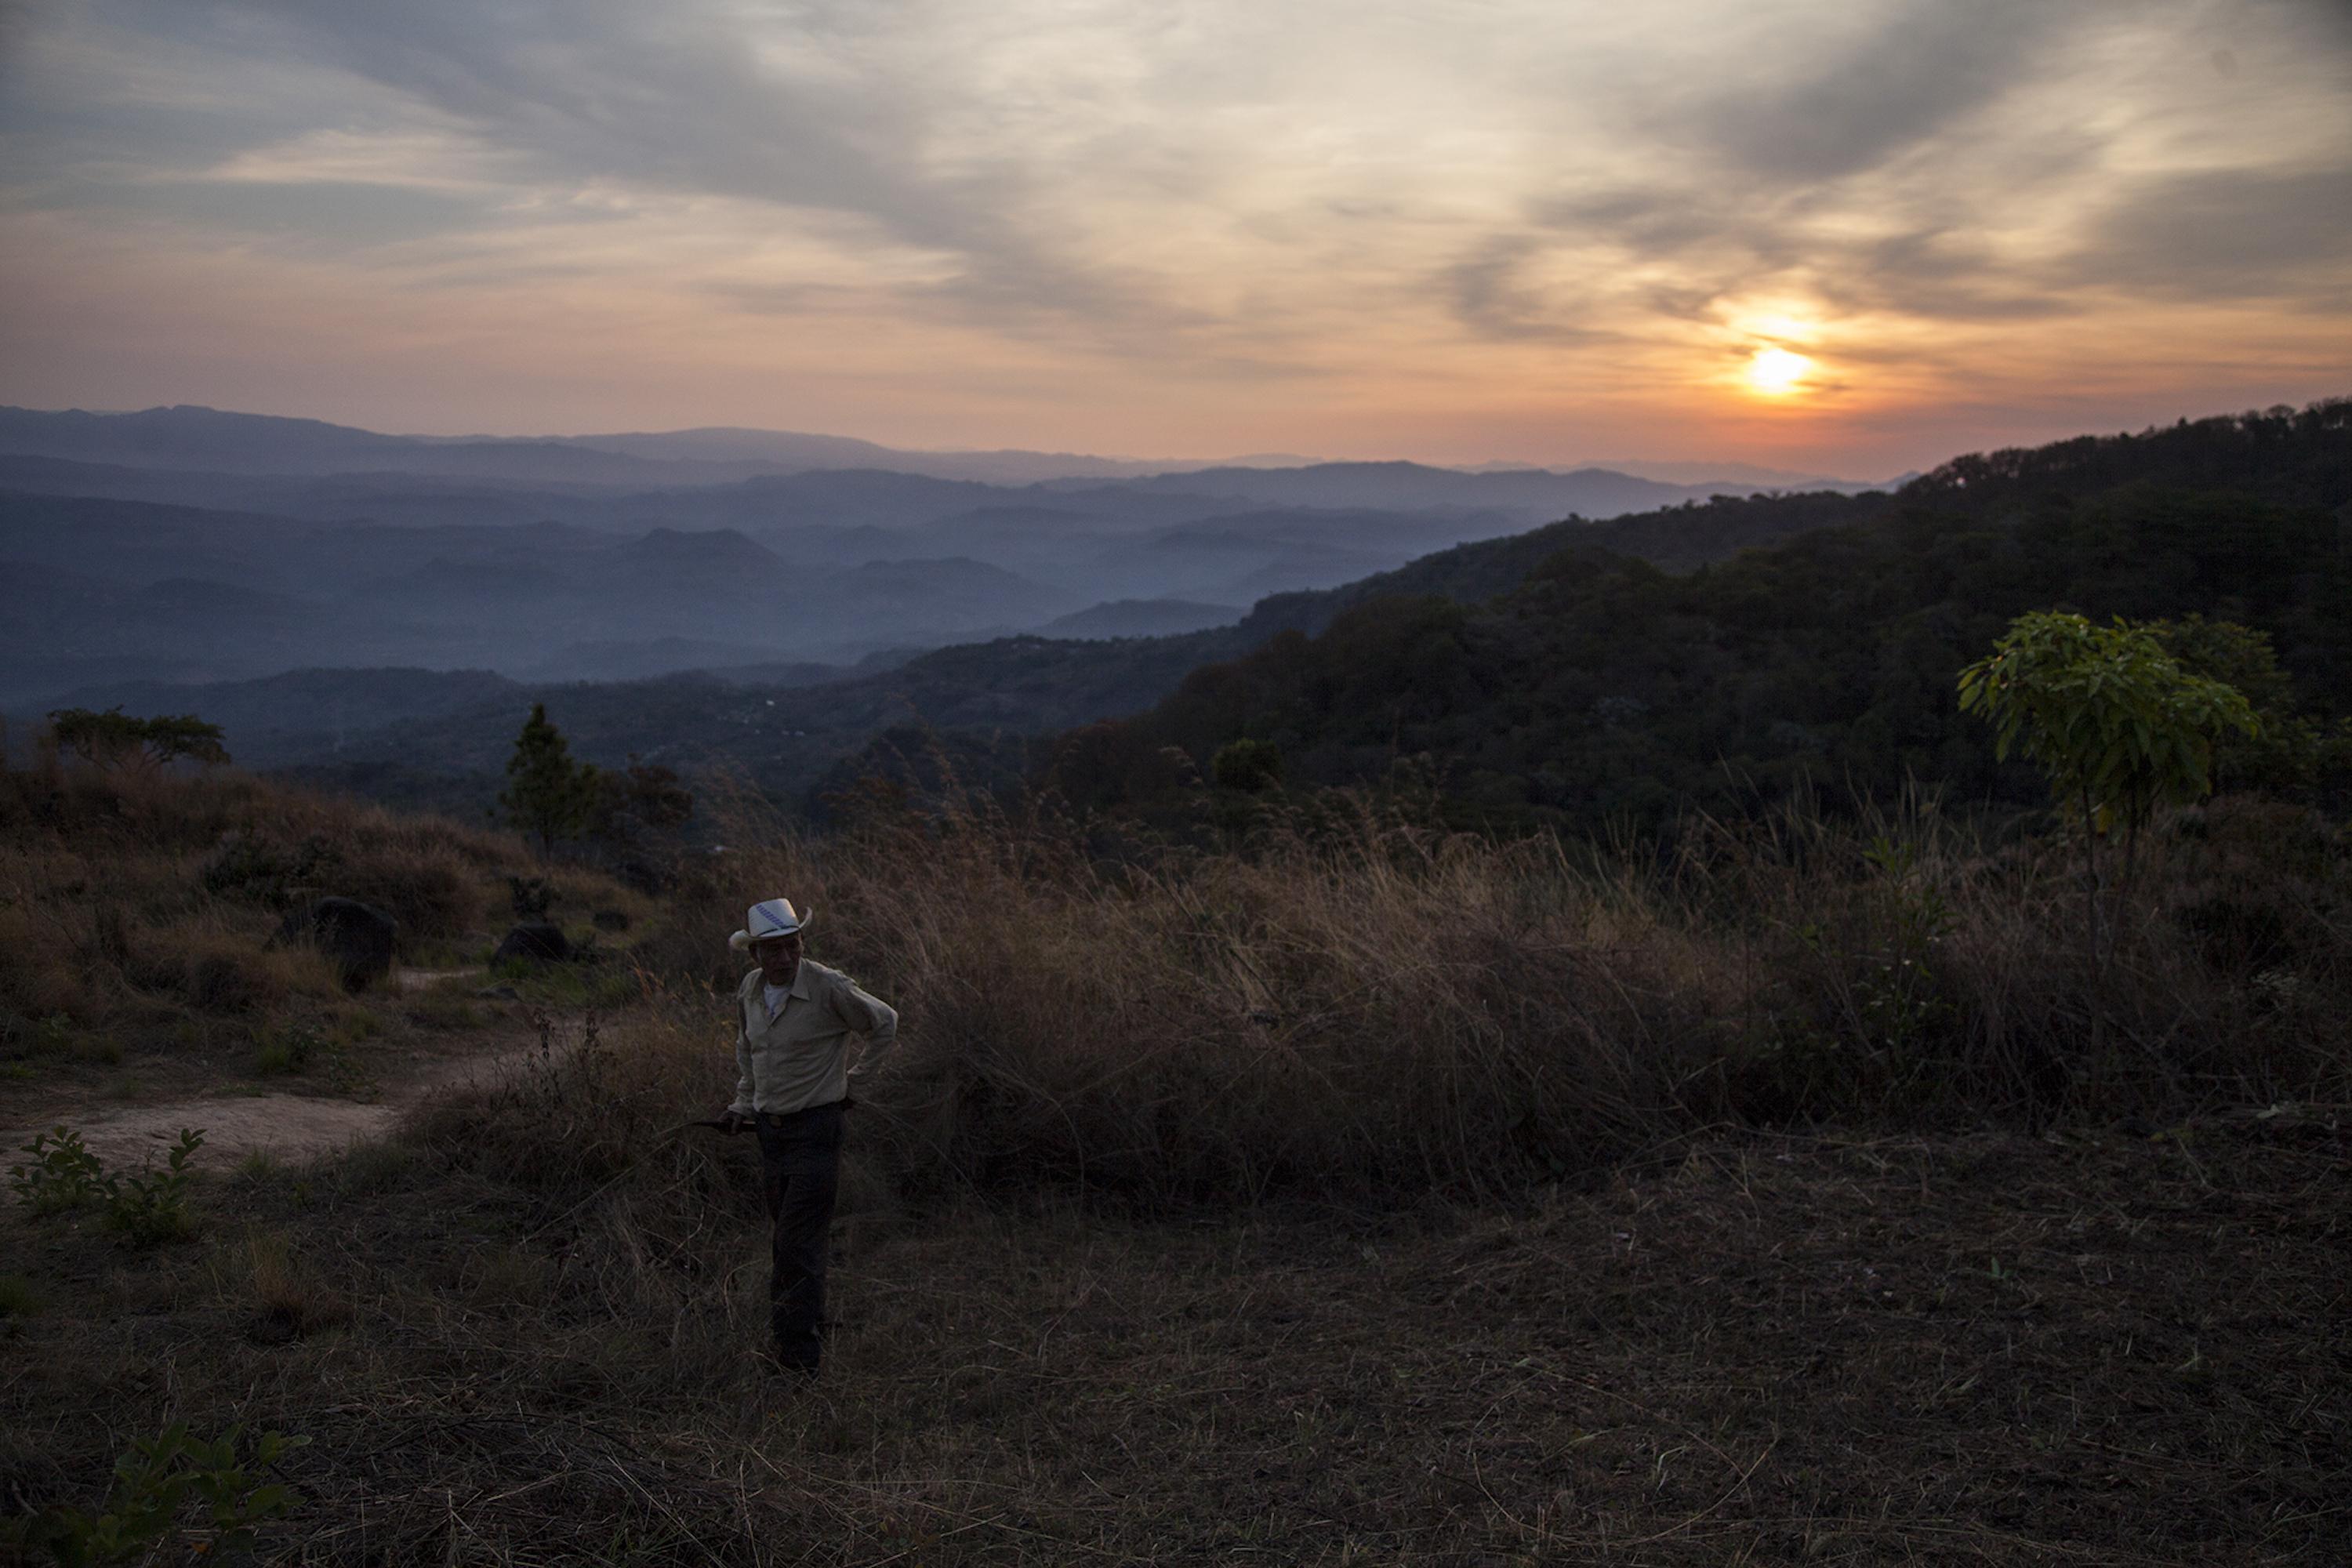 Tomás Ambrosio, 70, prepares a patch of land in El Volcán, an agricultural village in Morazán, in March 2017 for a commemmoration of the 37th anniversary of the martyrdom of Monsignor Romero. In 1981, during the civil war, families from the village were displaced when the Armed Forces destroyed their homes. After the signing of the 1992 Peace Accords, they returned to their lands. Photo: Víctor Peña/El Faro